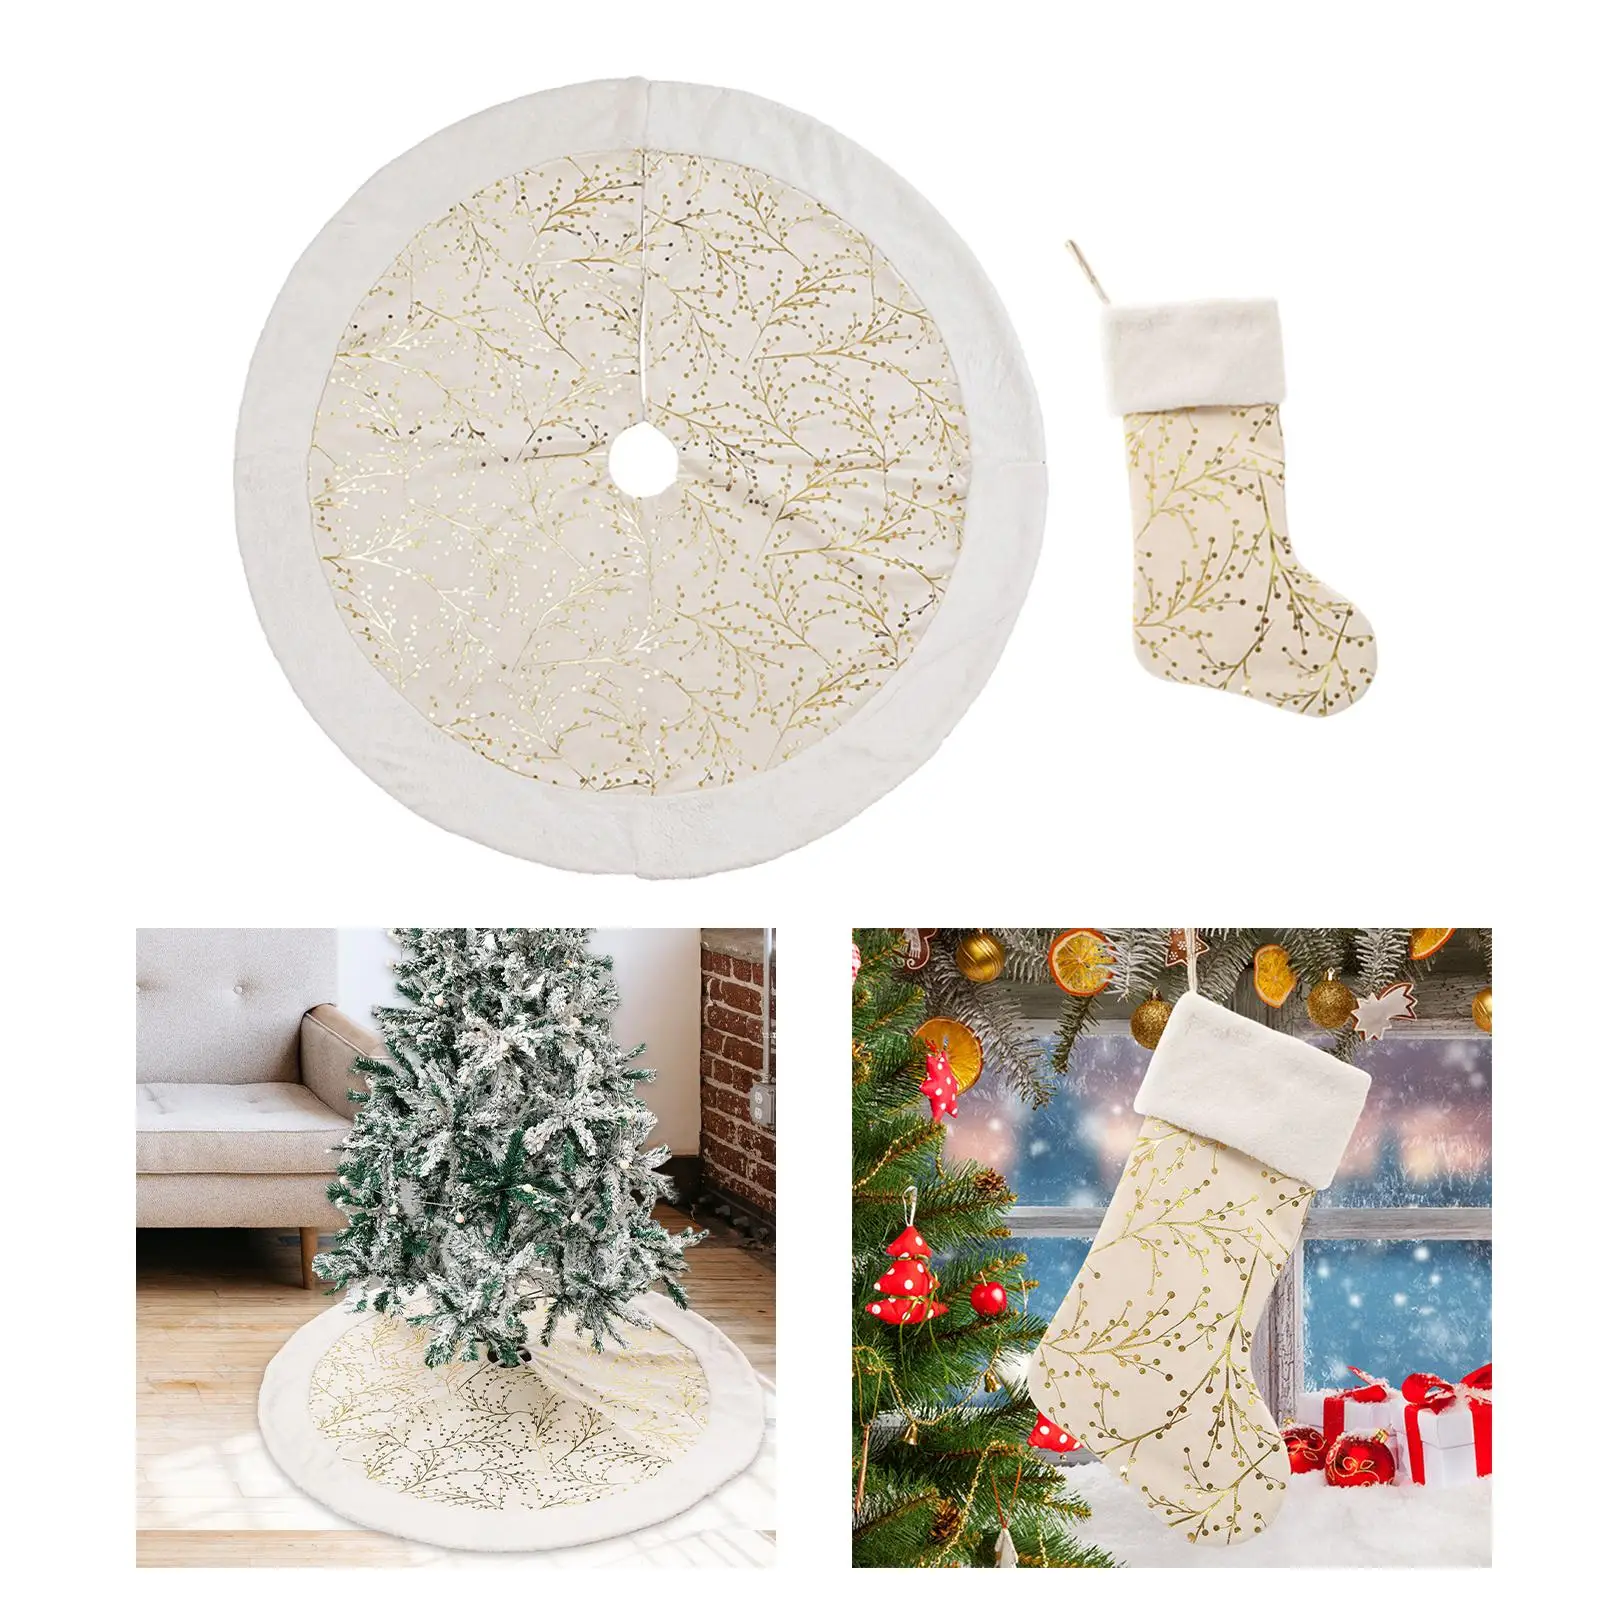 Xmas Tree Decoration Christmas Tree Skirt Hanging Stocking Floor Cover Ornament for Holiday Decoration